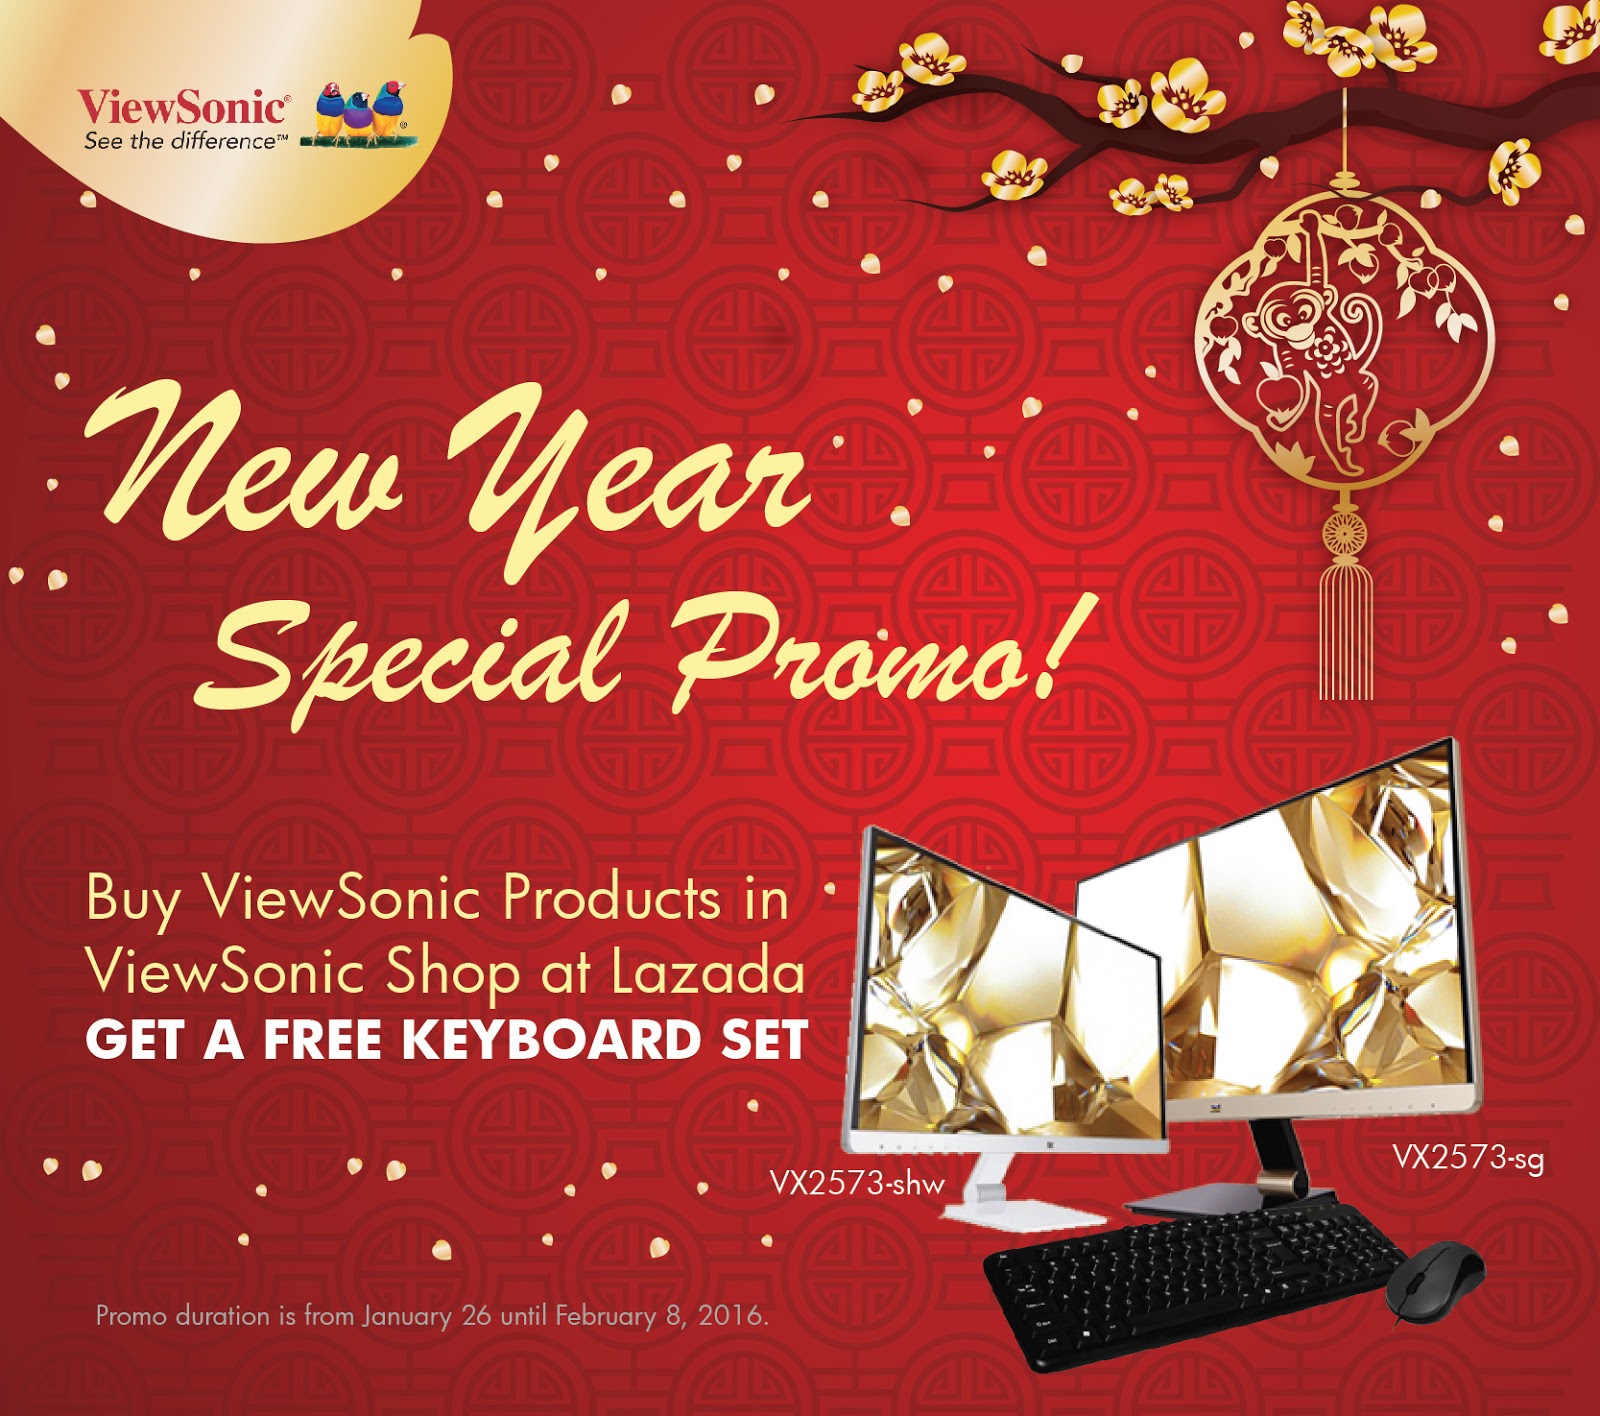 ViewSonic’s Limited-time Chinese New Year Promotion